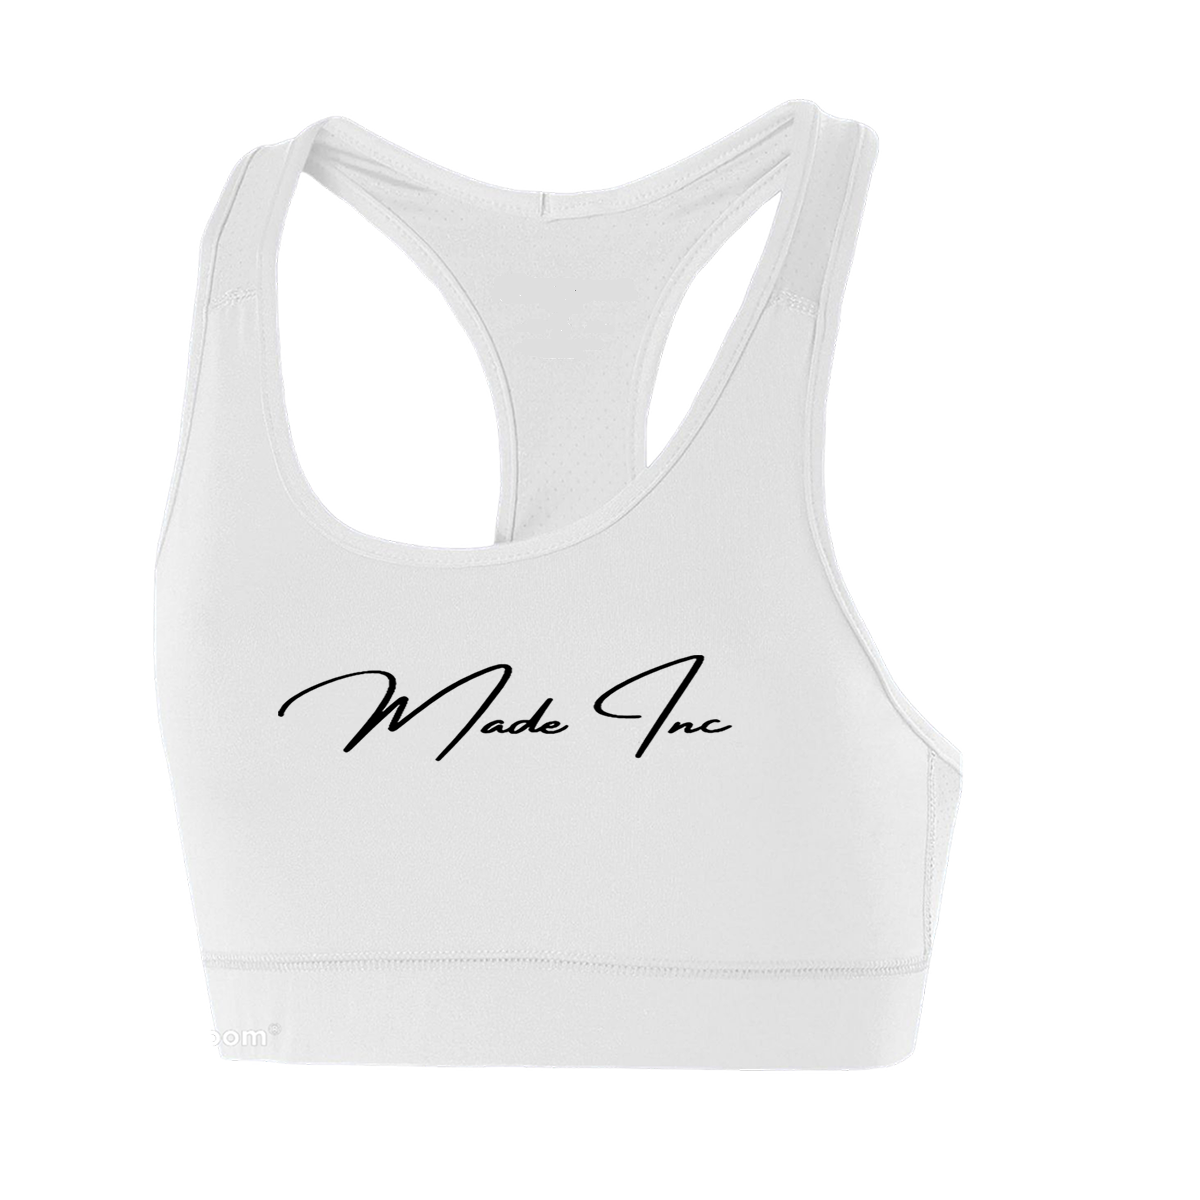 Image of opulent activewear crafted from 92% polyester and 8% spandex wicking pinhole mesh back. Classic fit with keyhole racerback design for timeless elegance and sophisticated charm. by Made Inc 